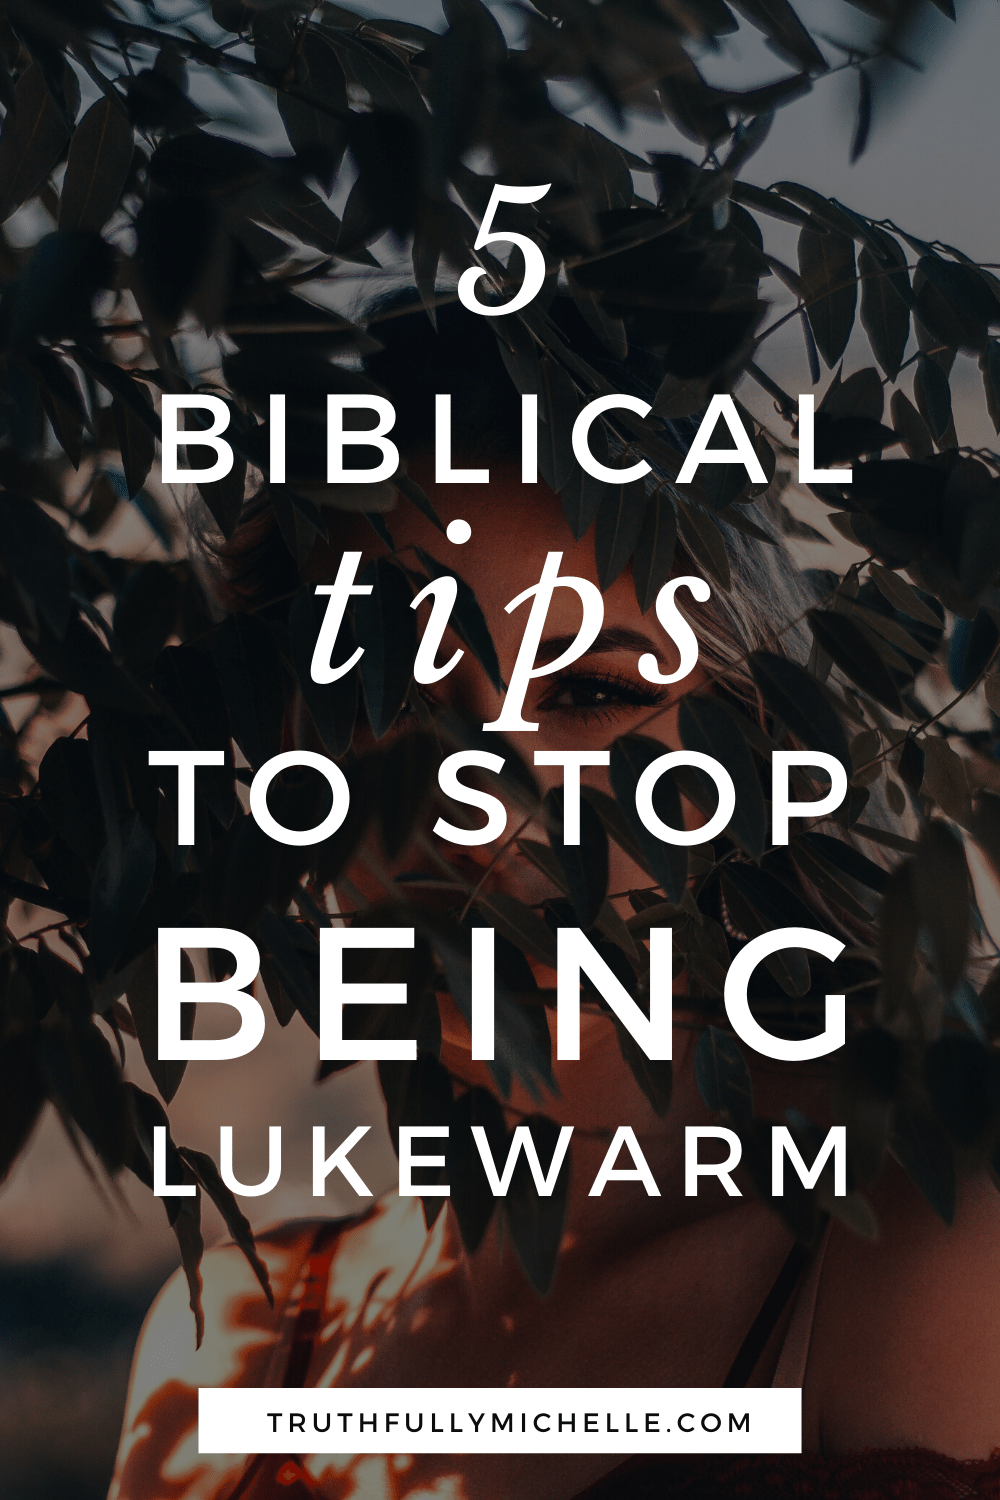 how to stop being a lukewarm christian, signs of a lukewarm christian, what is a lukewarm christian, how to not be a lukewarm christian, don’t be a lukewarm christian, lukewarm christian lesson, lukewarm christianity, lukewarm faith, the lukewarm christian, what does it mean to be a lukewarm christian, definition of lukewarm christian